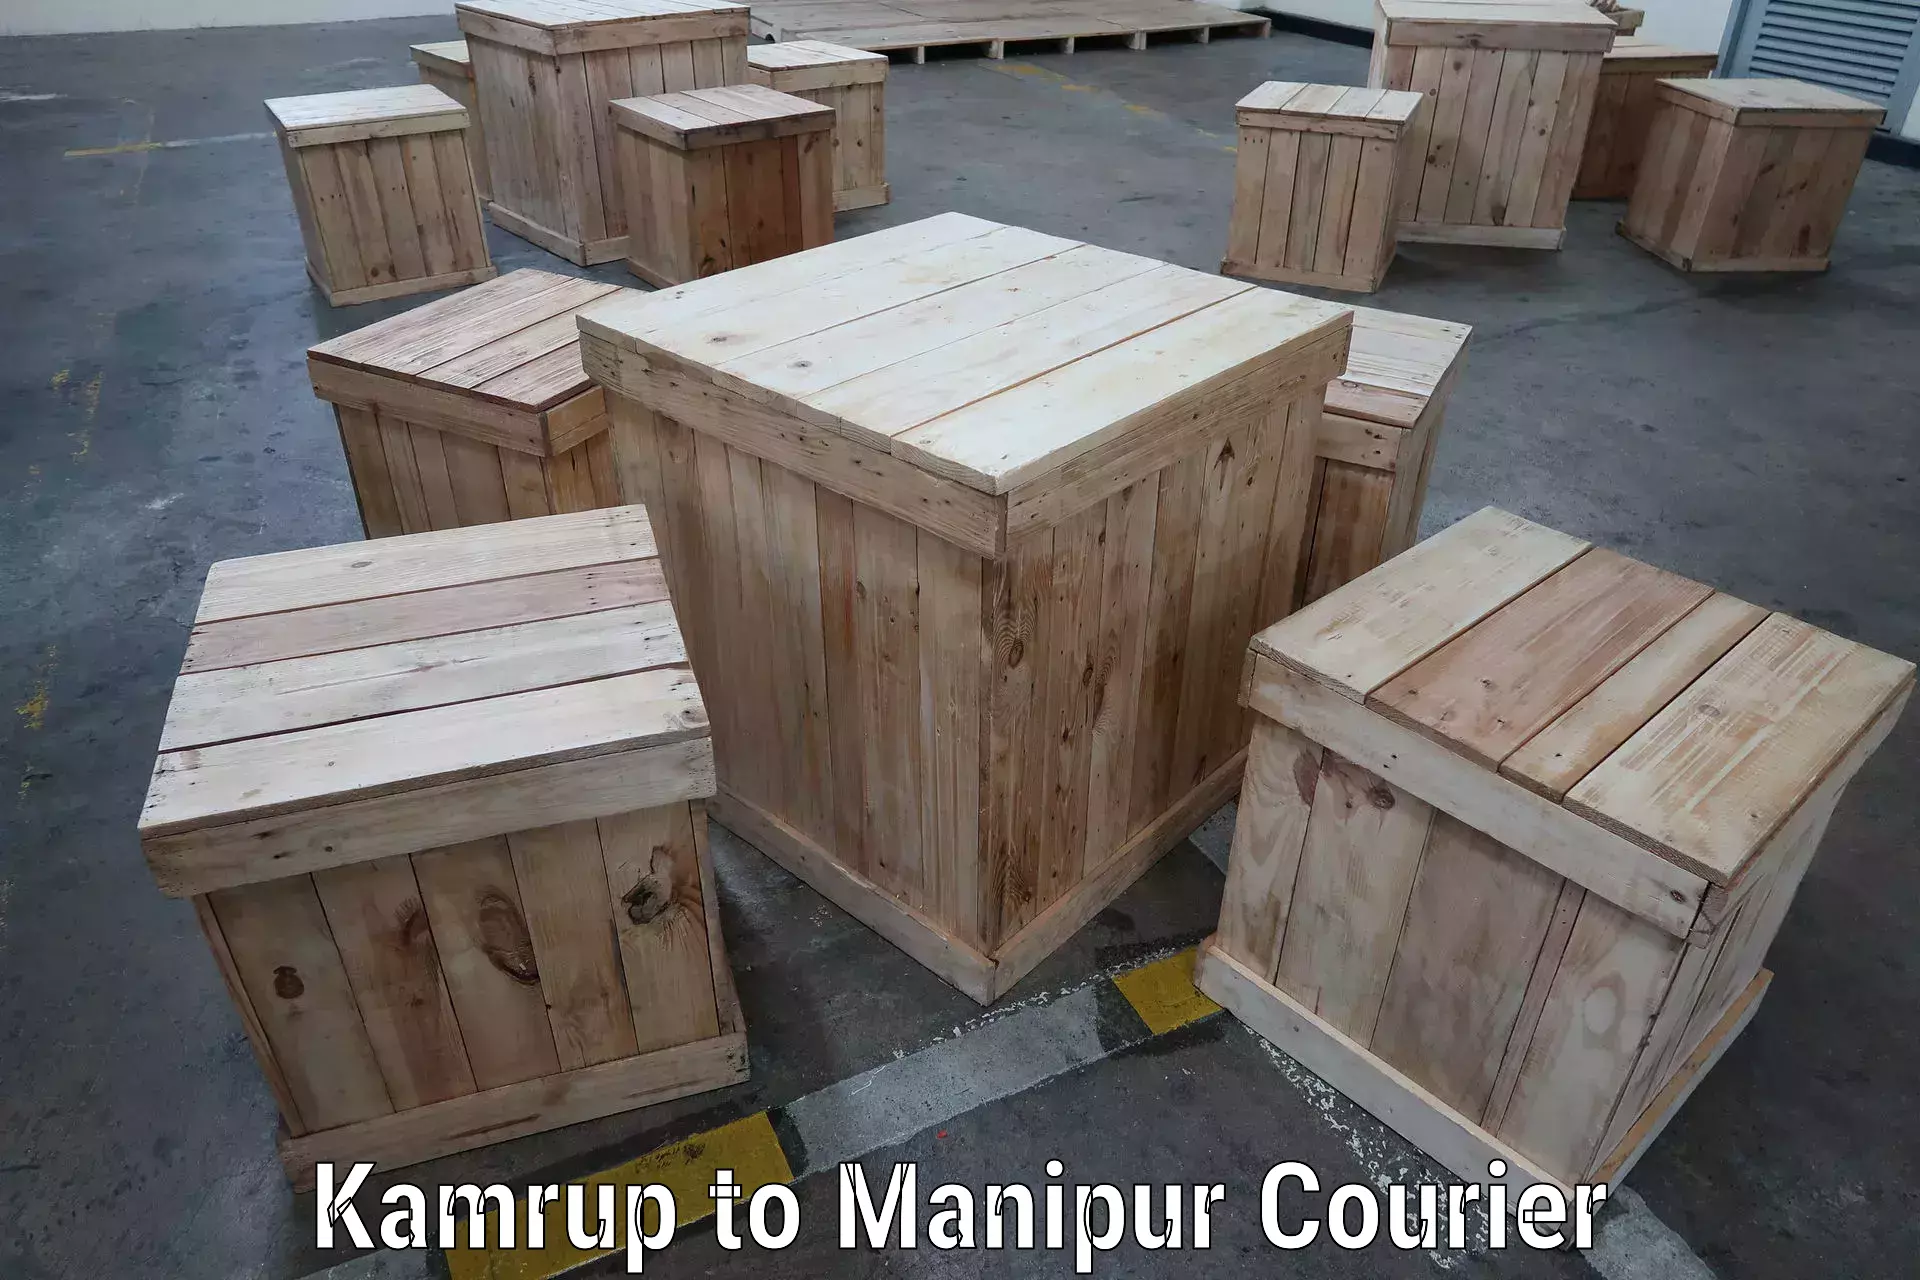 Efficient order fulfillment Kamrup to Kakching